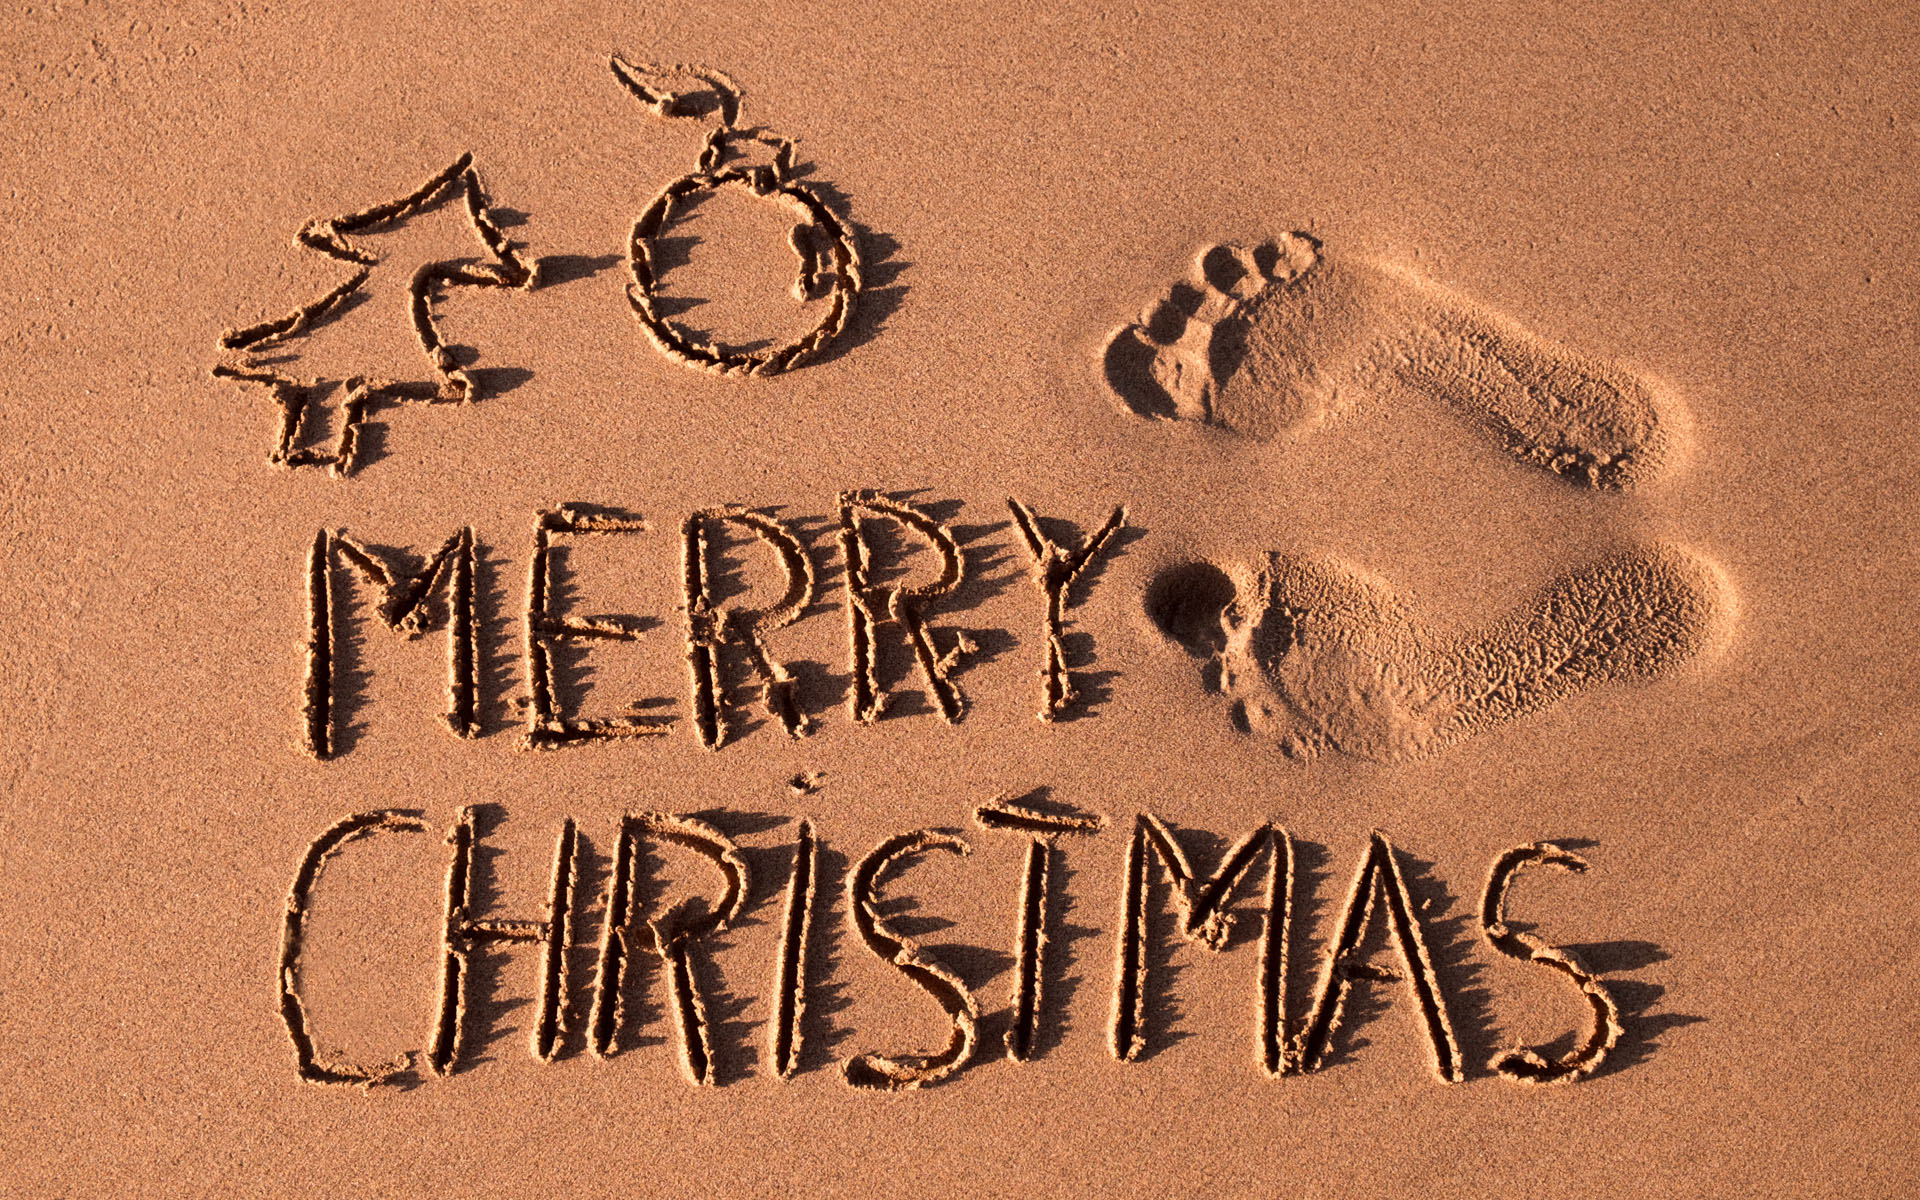 Top Best Merry Christmas HD Wallpaper The Indian Wire